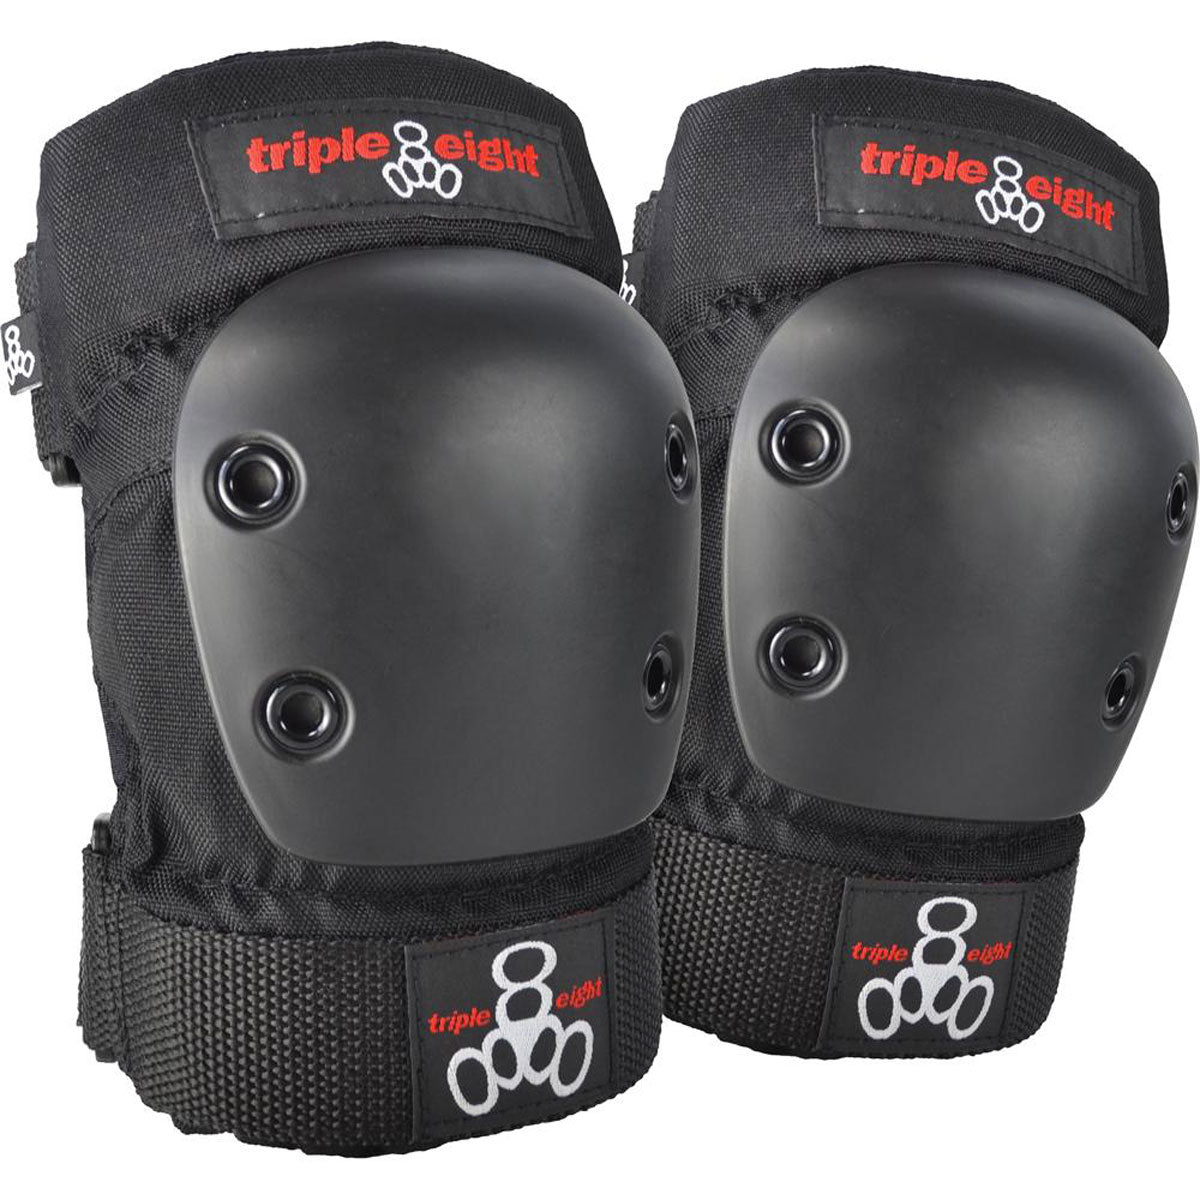 Triple Eight Park 2 Pack of Pads - Black image 3